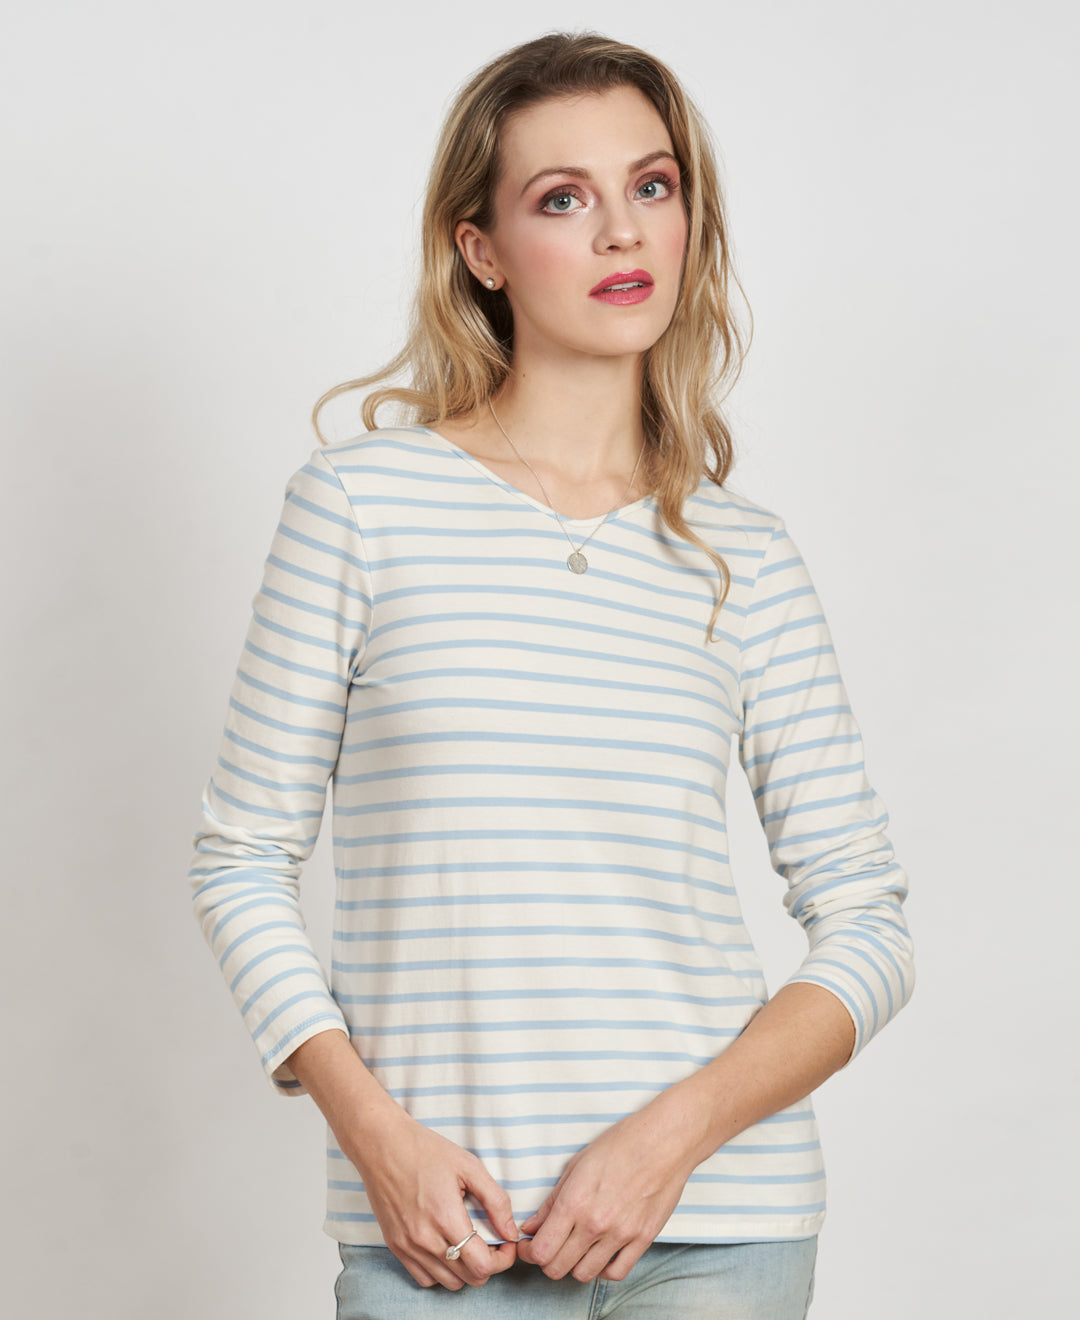 Breton-striped organic cotton shirt - Ethically made in Canada